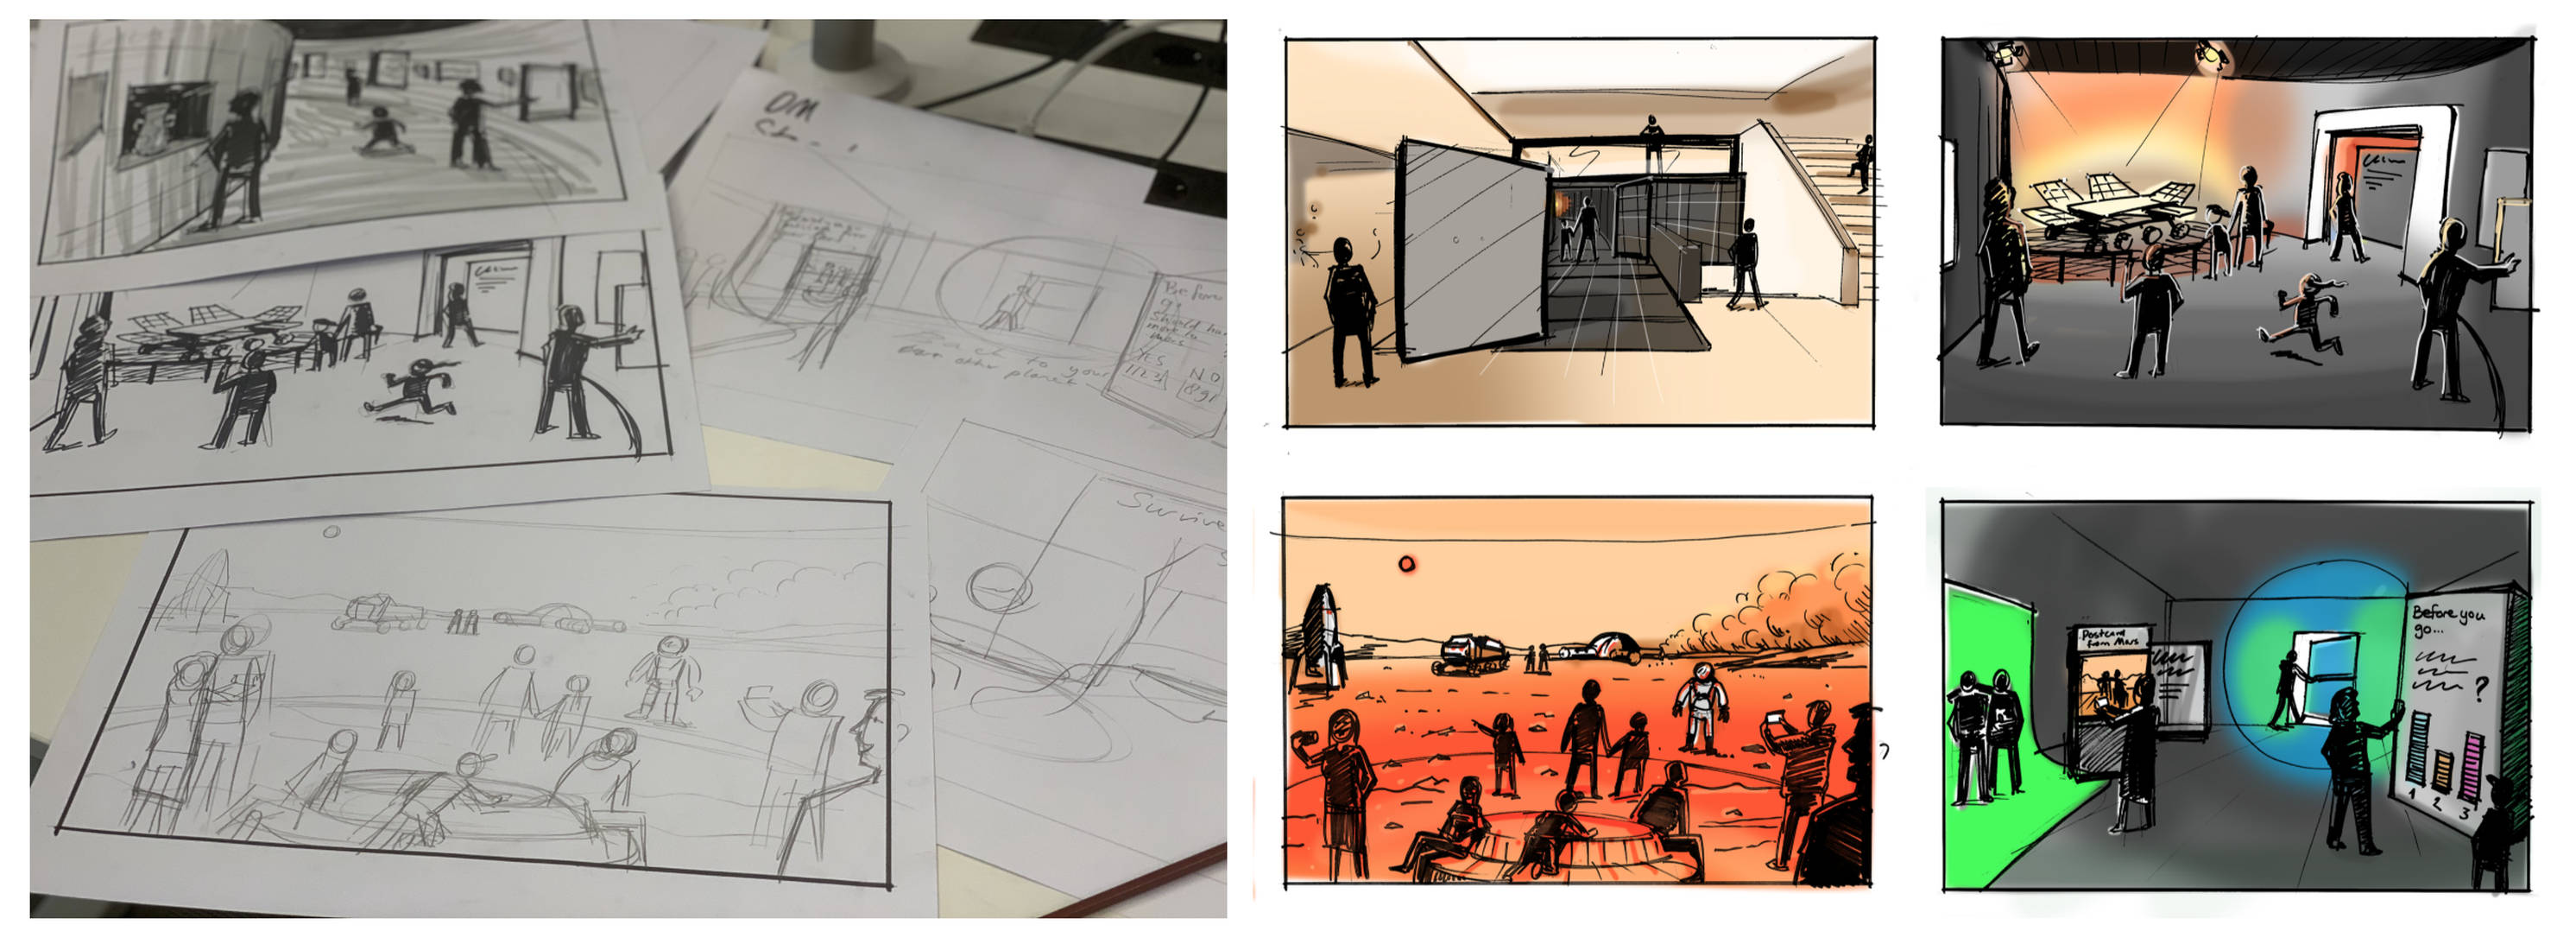 Storyboards Mars expedition